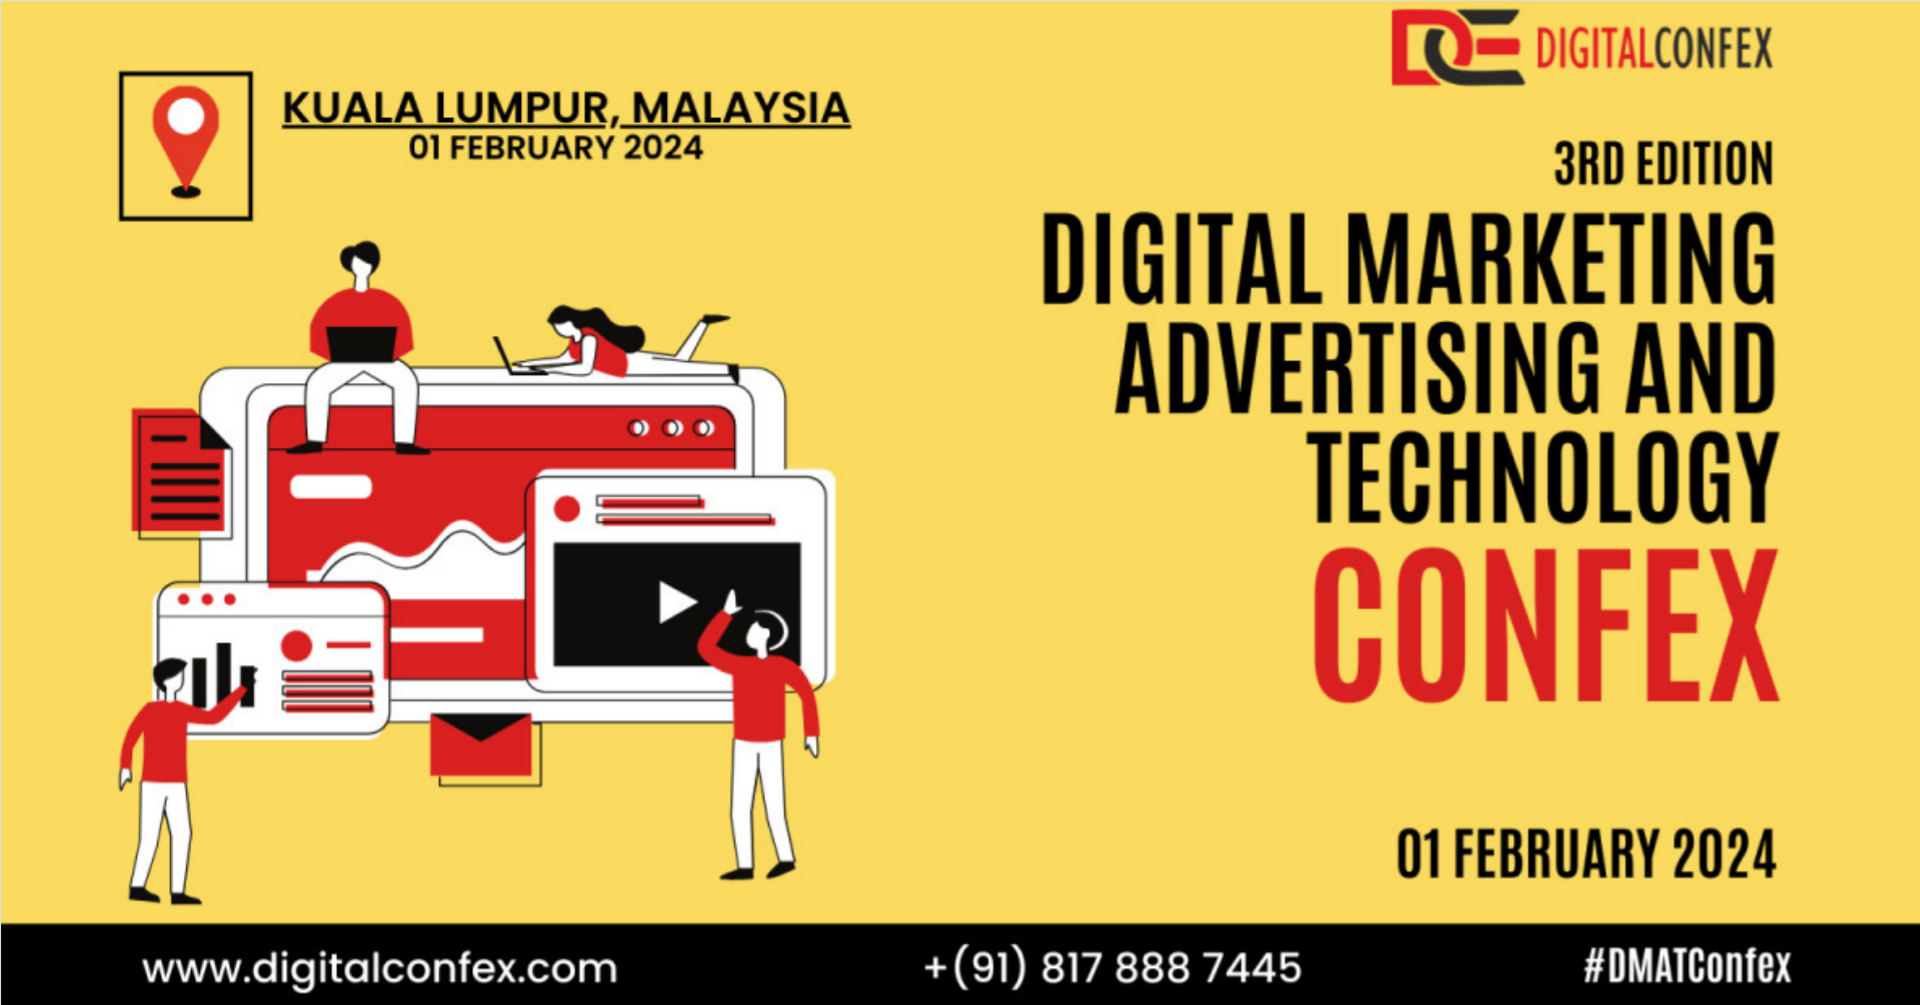 Digital Marketing, Advertising And Technology Confex 2024, Venue to be announced soon, Kuala Lumpur, Malaysia